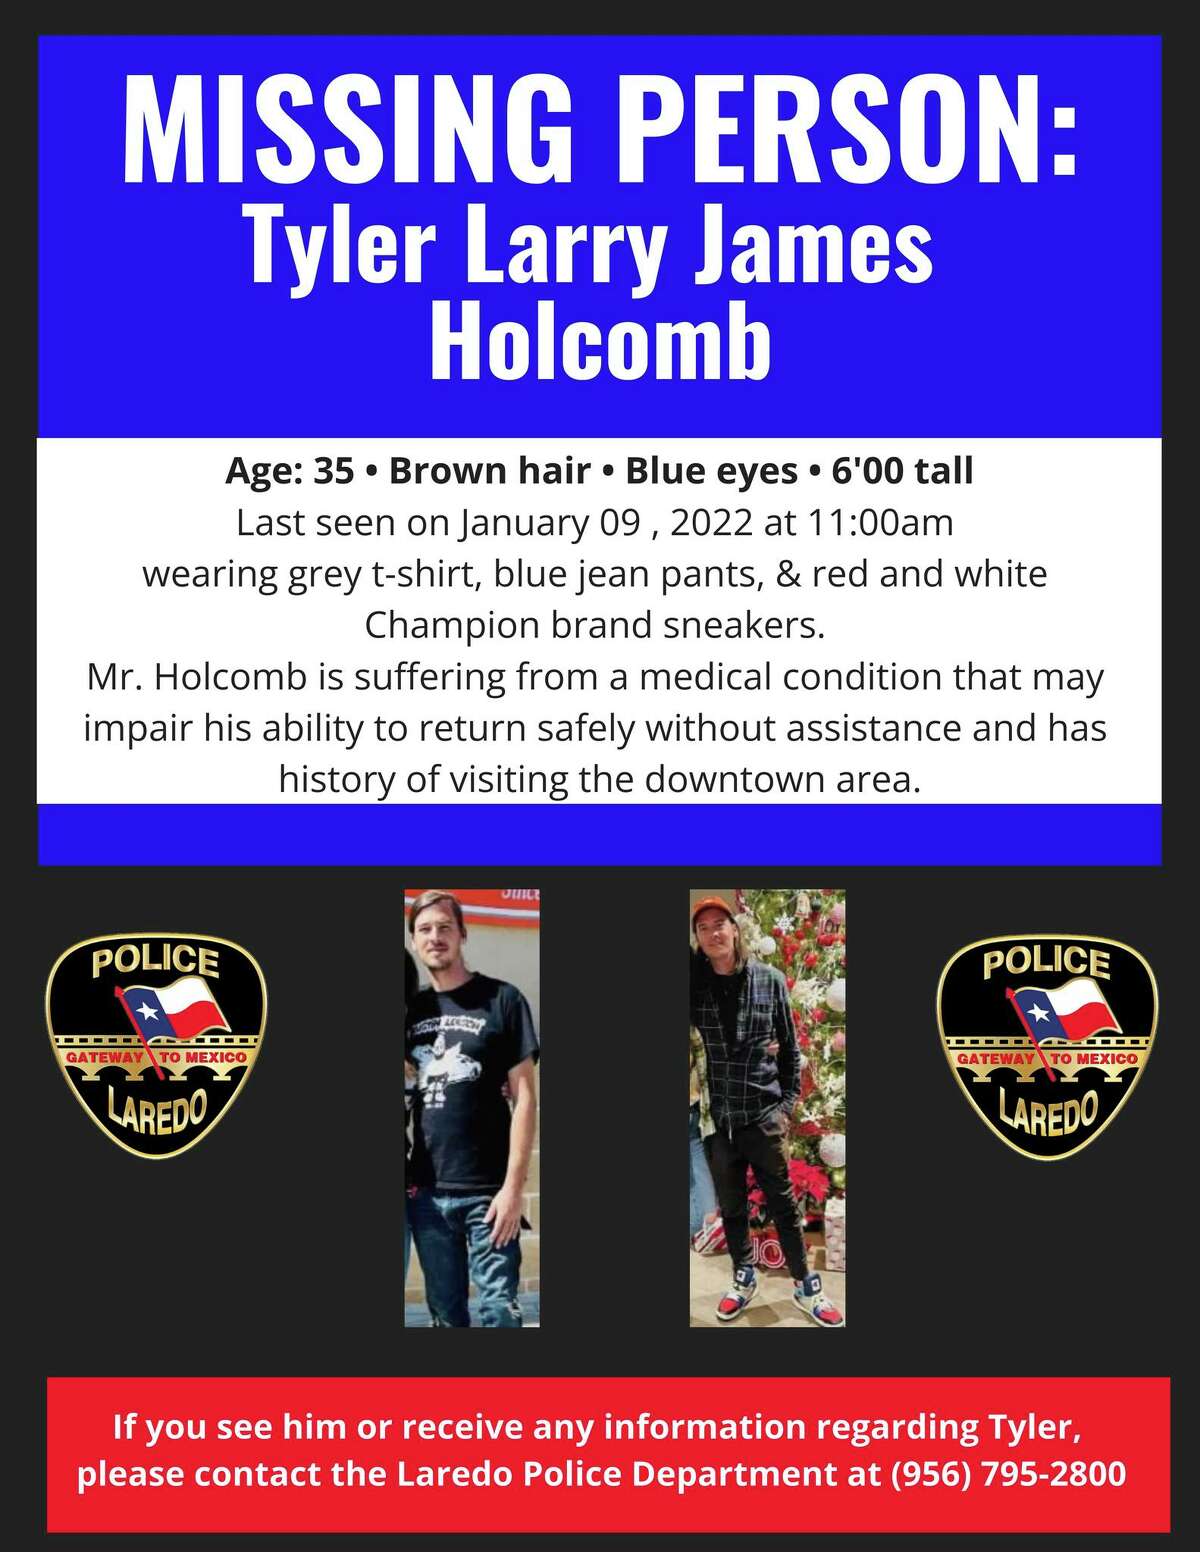 The Laredo Police Department is seeking the community's assistance in locating Tyler Larry James Holcomb, age 35. He was reported missing on Jan. 9, 2023.